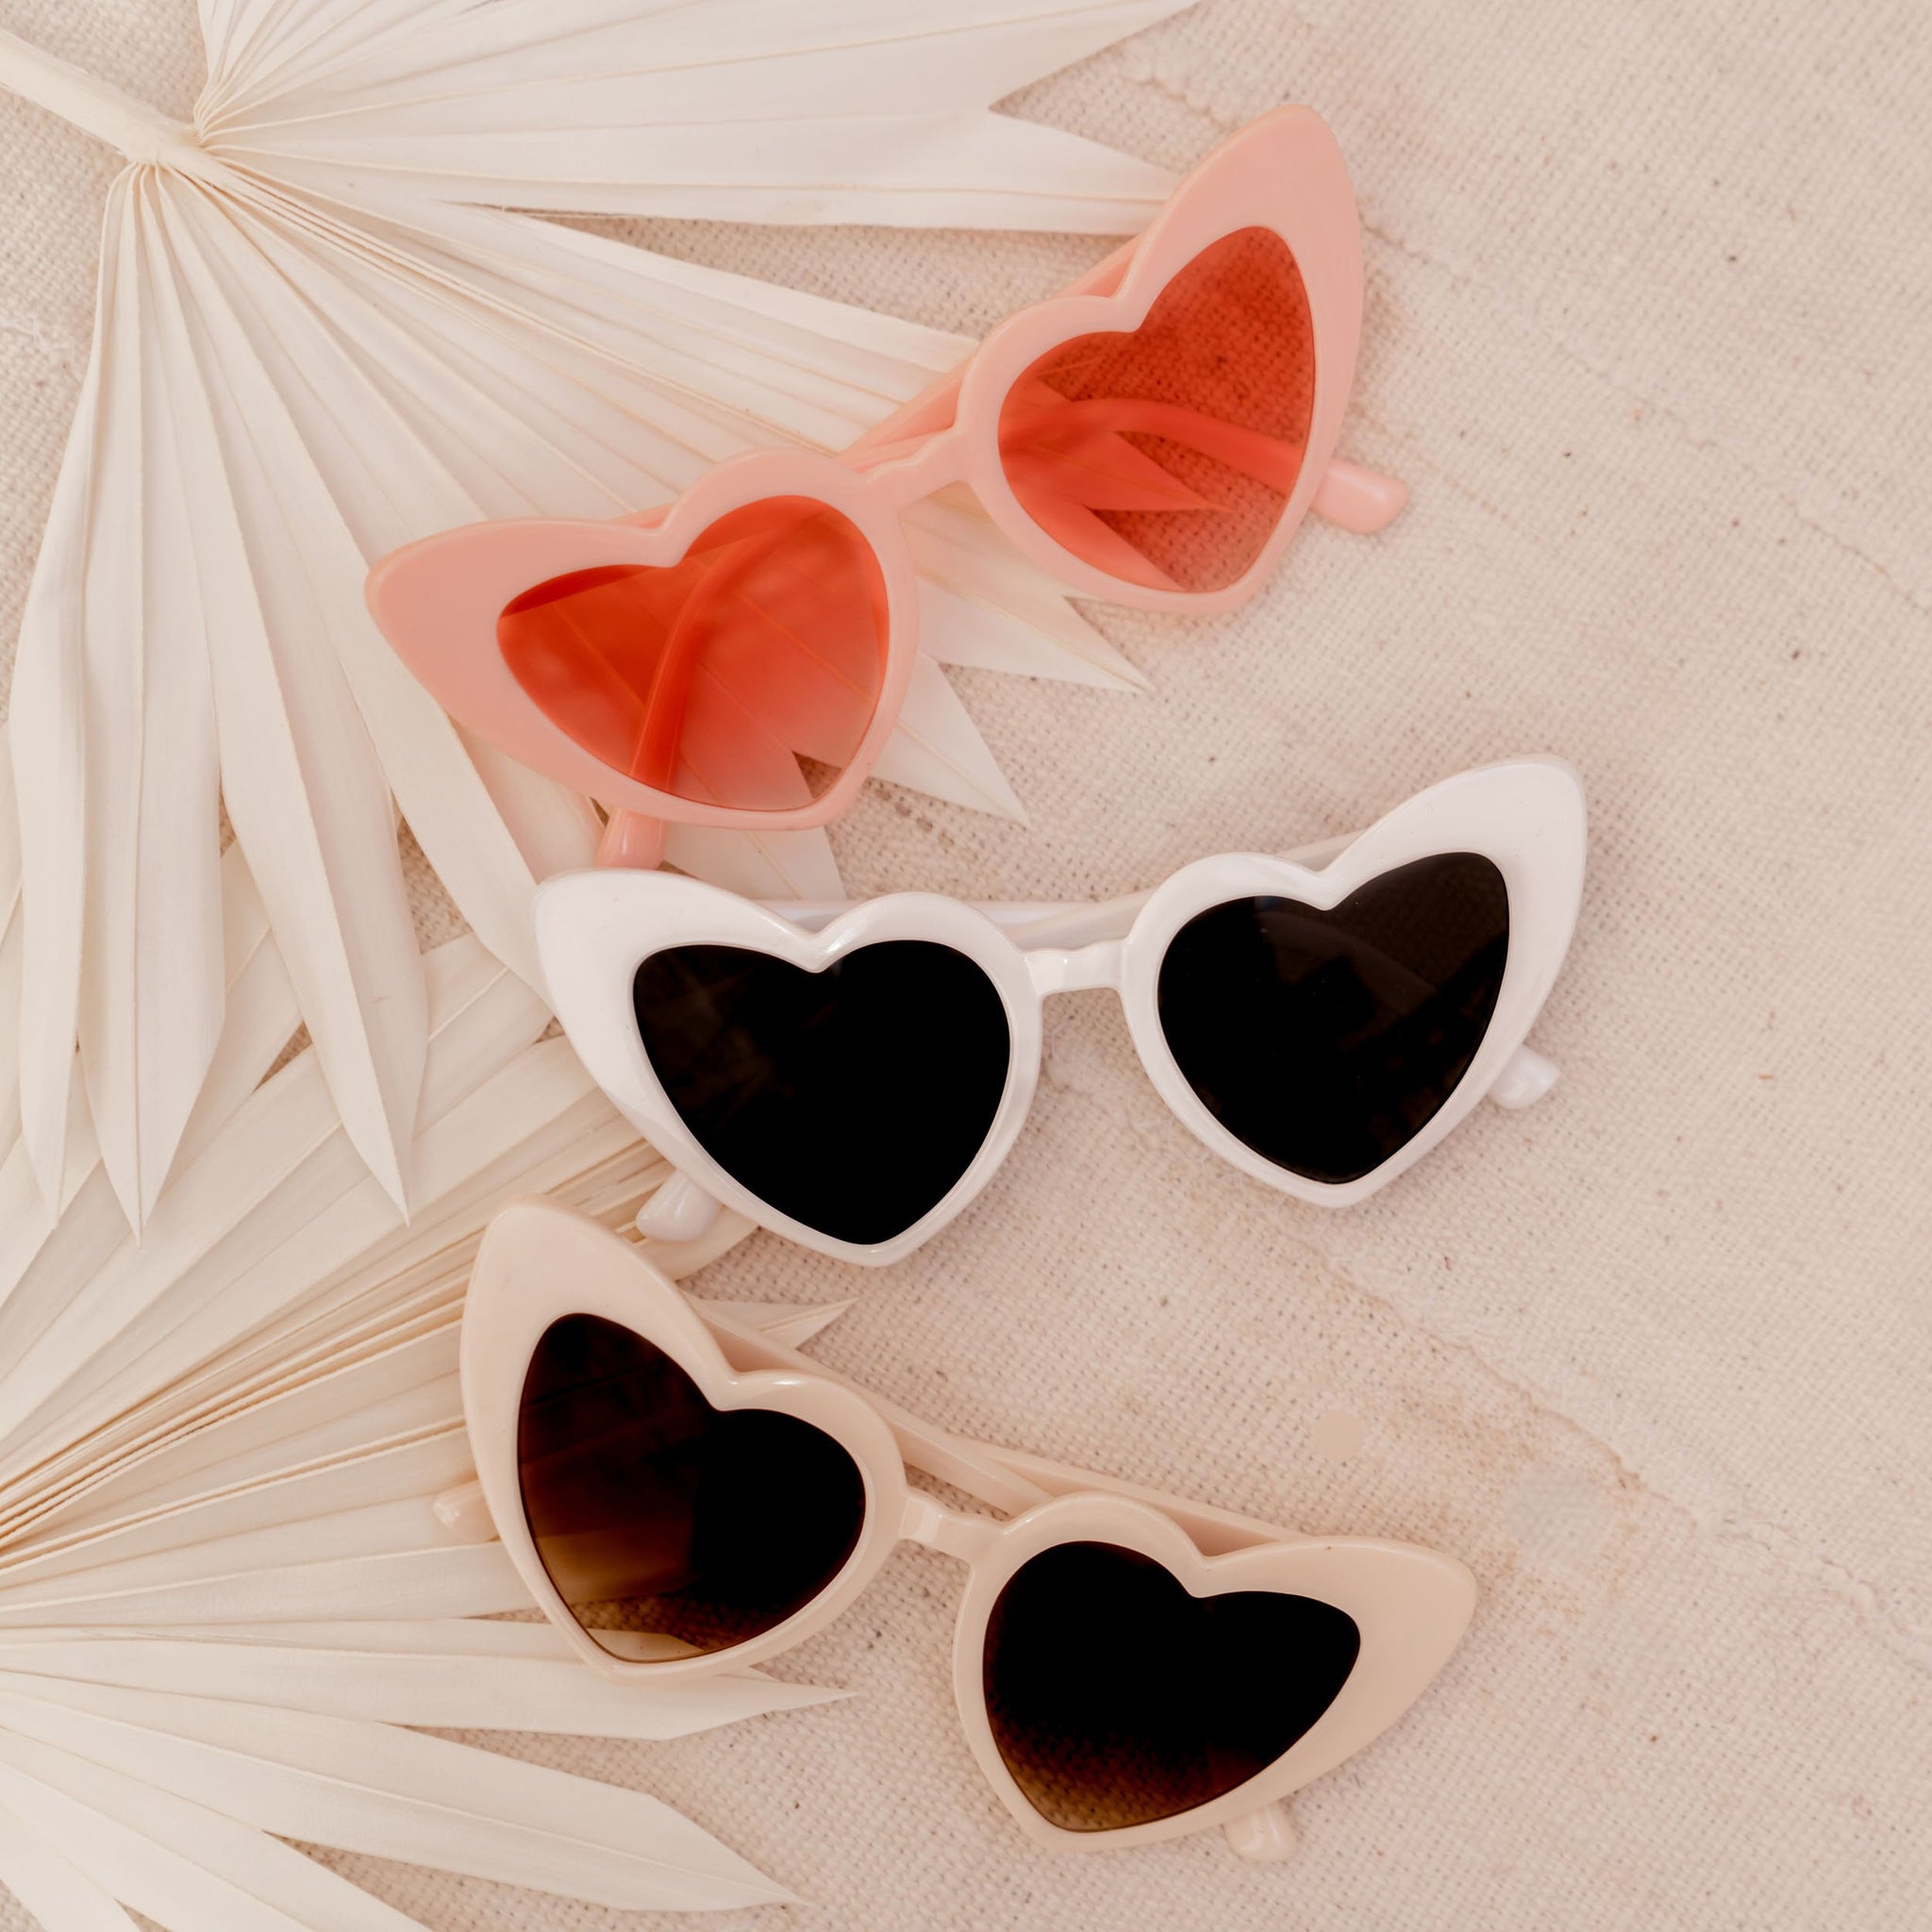 From above, we see three pairs of Heart Sunglasses by Birdy Grey next to two handheld fans. The first pair is pink with pink lenses. The second pair is white with black lenses. The third pair is nude with smoky lenses.